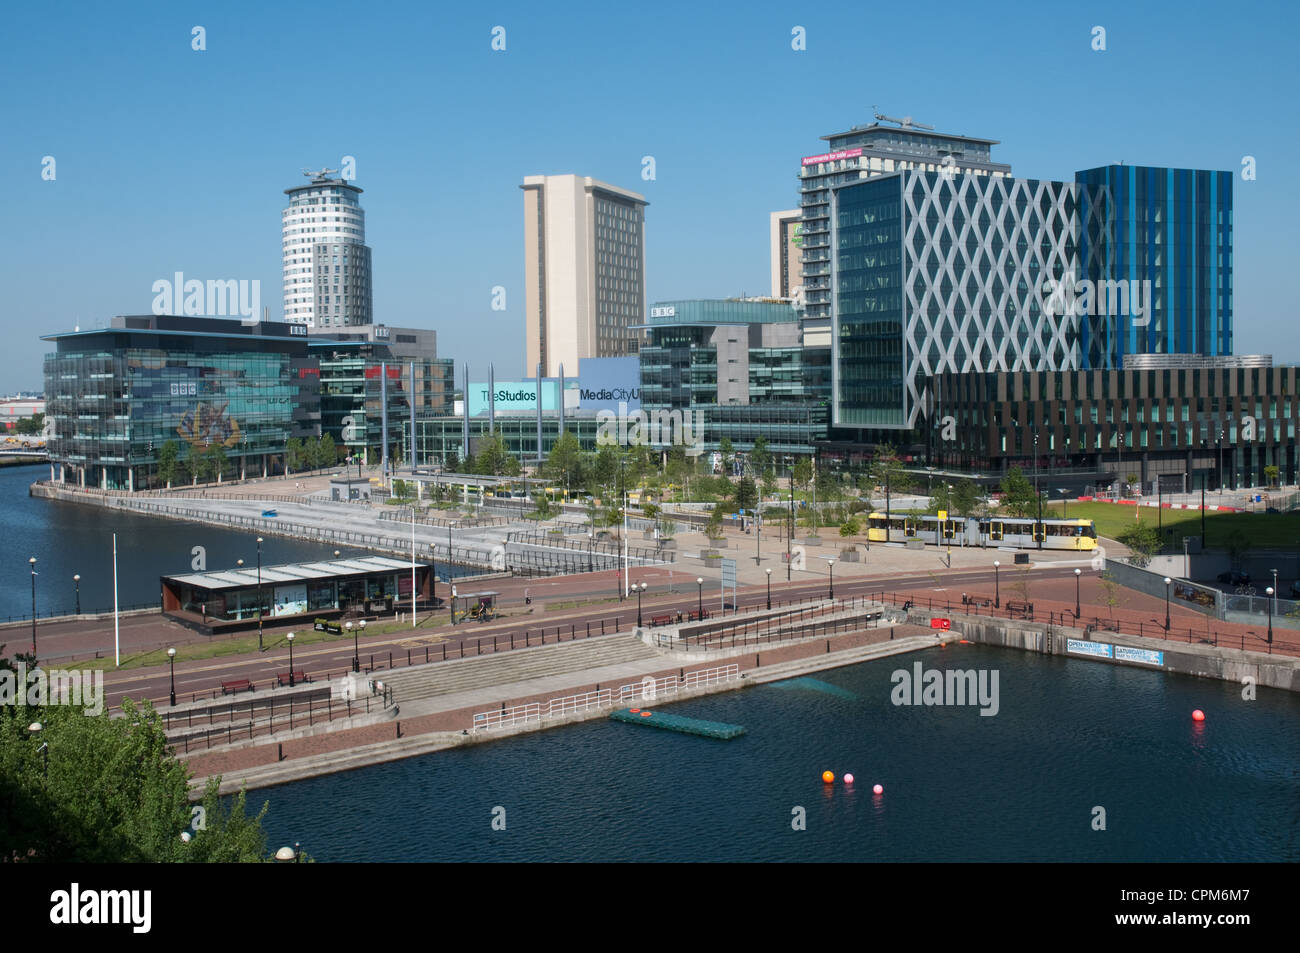 Media City UK a development in Salford Quays home to various media organisations including the BBC. Stock Photo